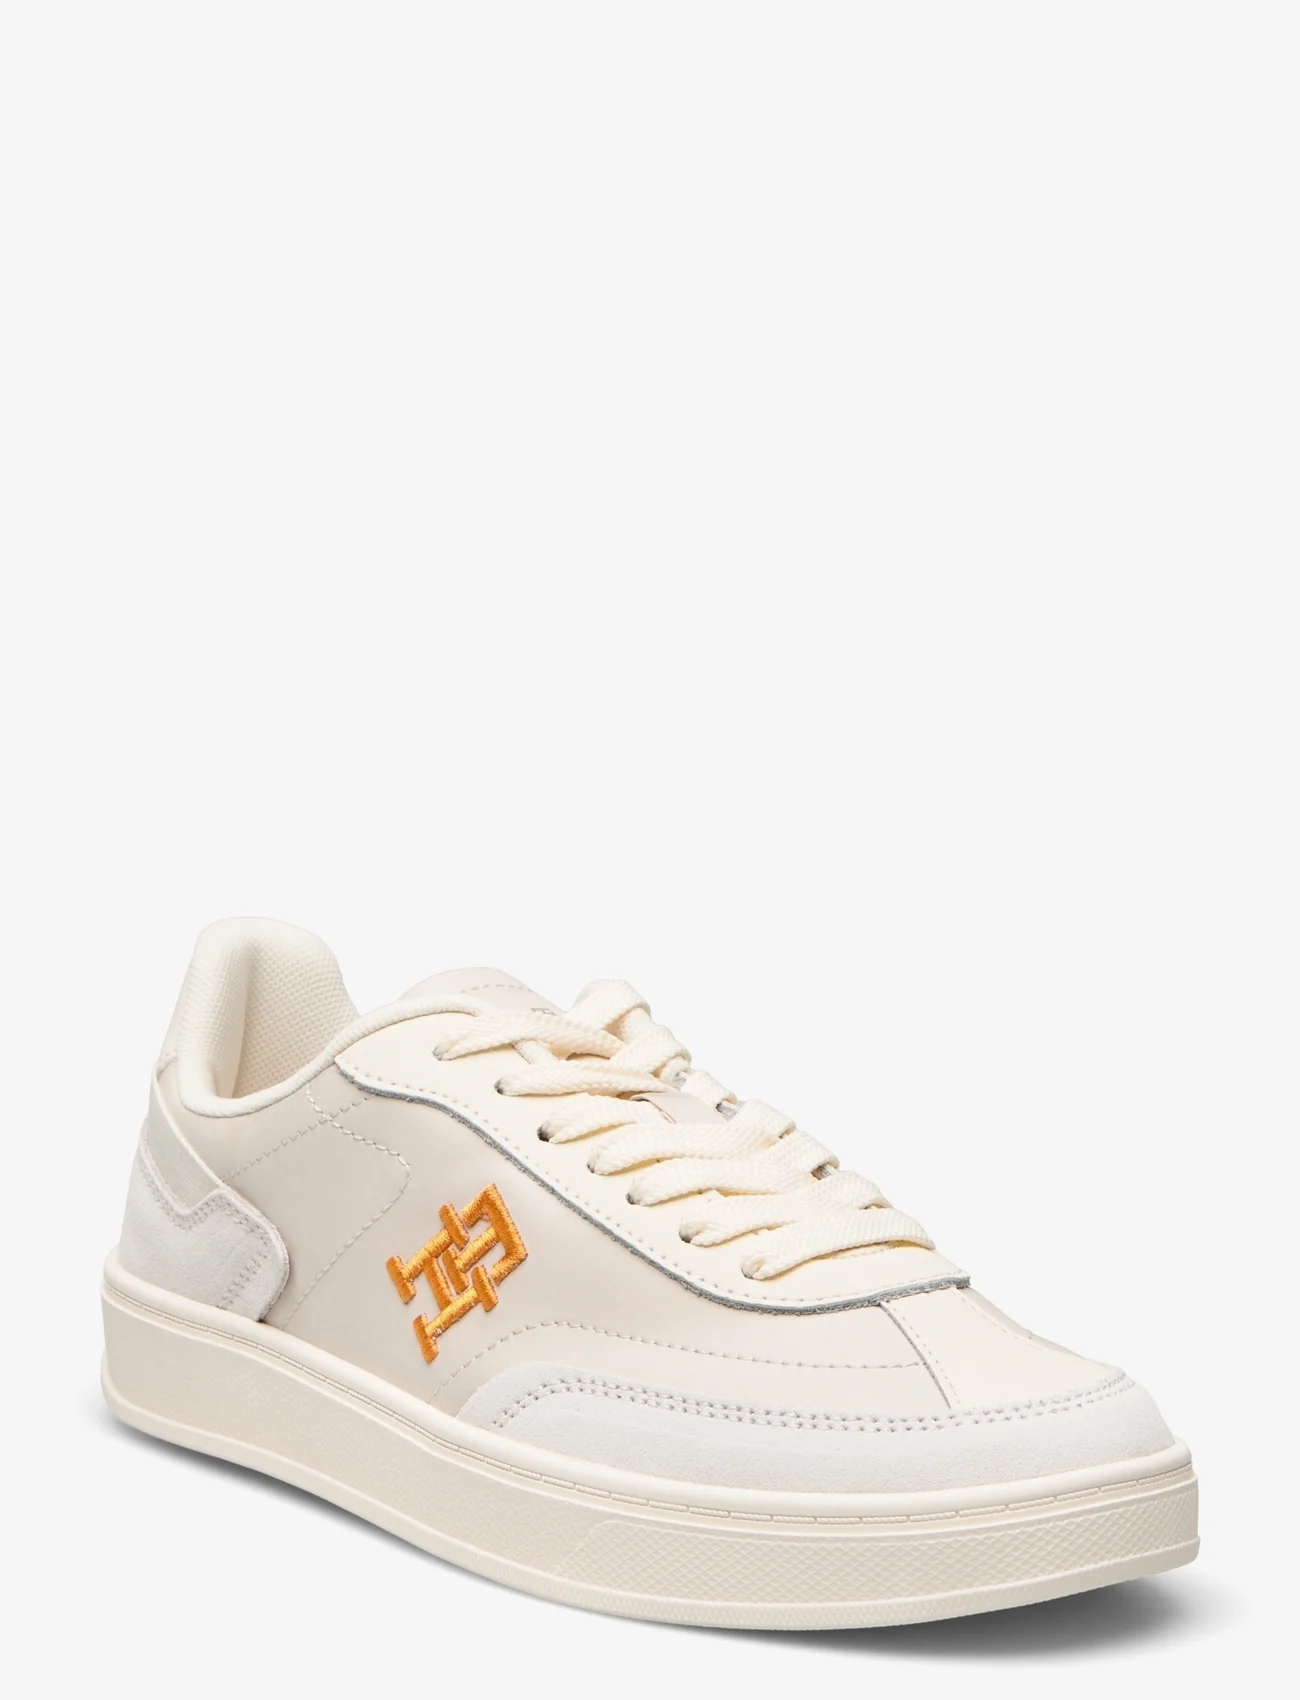 Tommy Hilfiger - TH HERITAGE COURT SNEAKER - low top sneakers - calico - 1